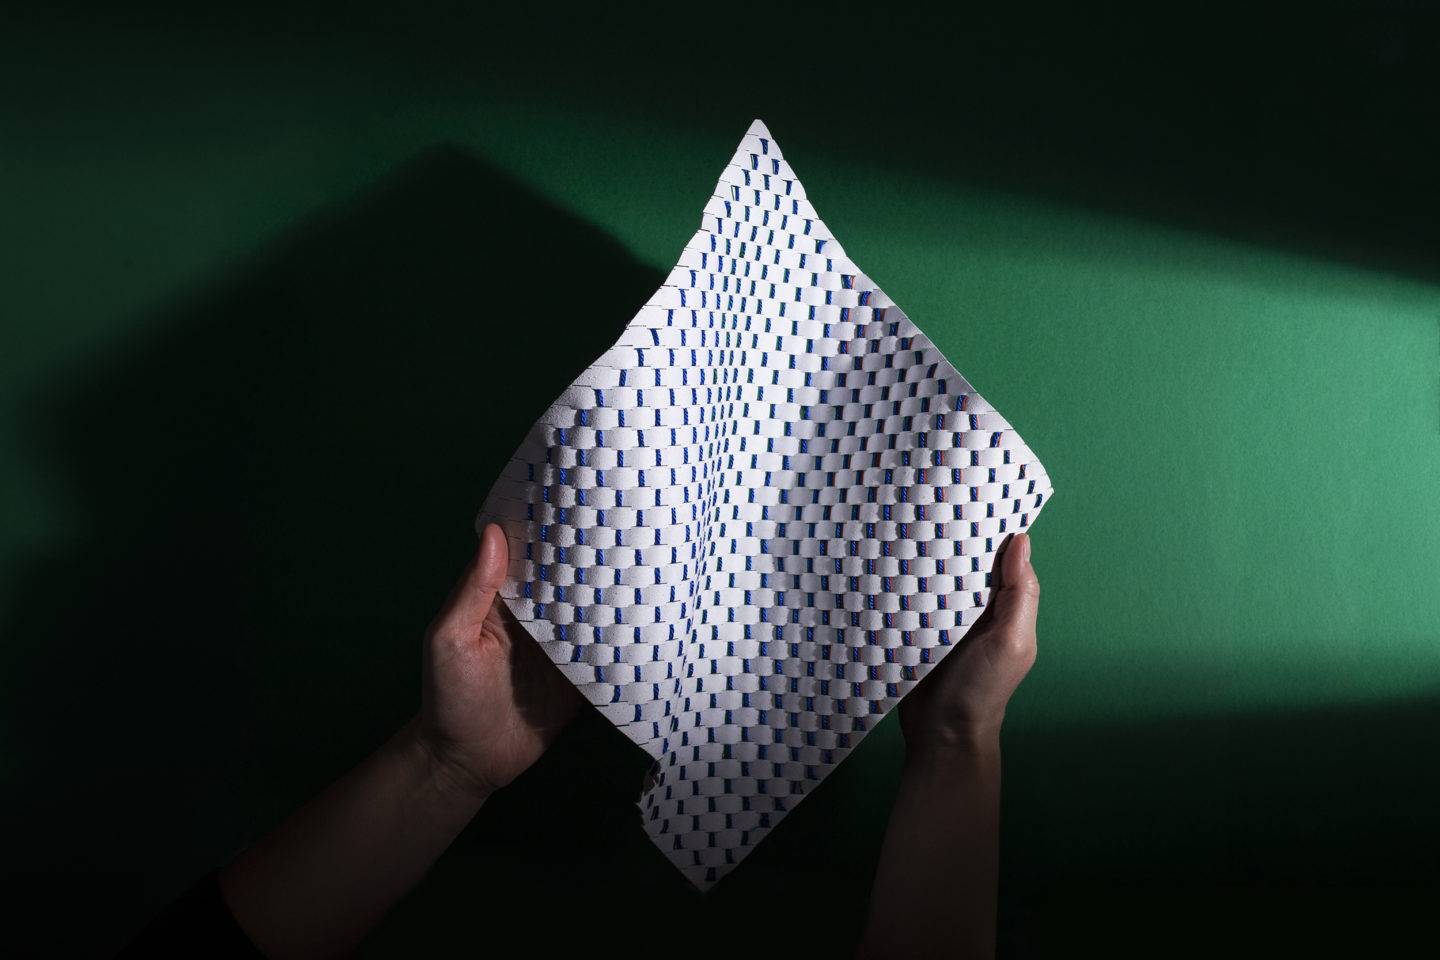 Two hands holding a white woven material in front of a dark green background